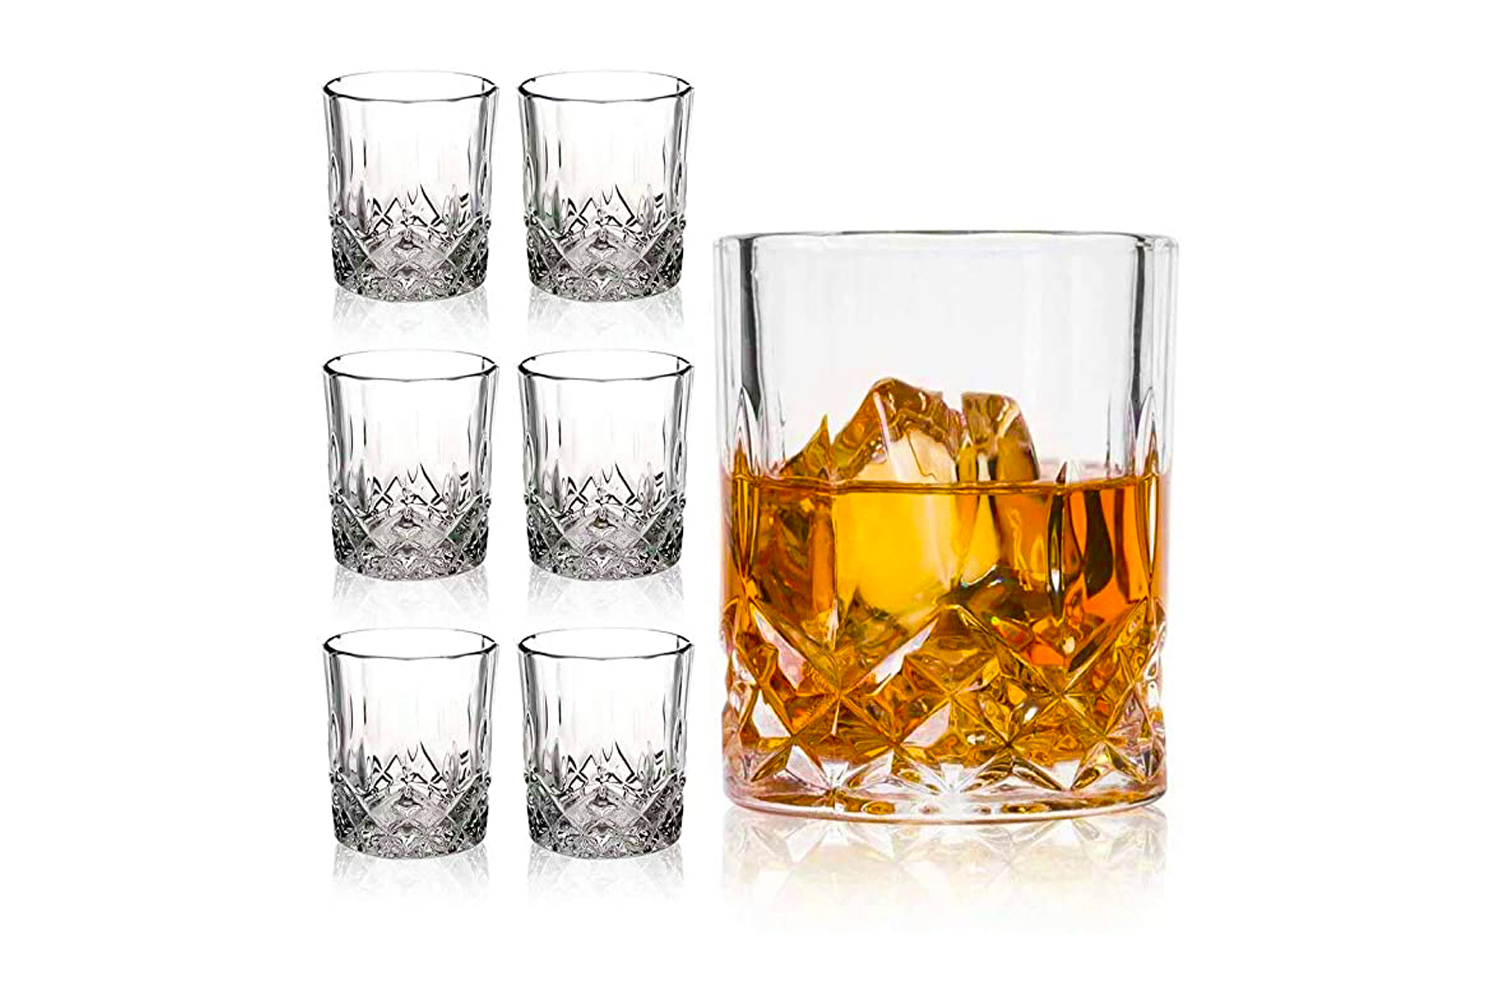 https://www.themanual.com/wp-content/uploads/sites/9/2021/03/farielyn-x-crystal-old-fashioned-whiskey-glasses-set-of-6.jpg?fit=800%2C800&p=1